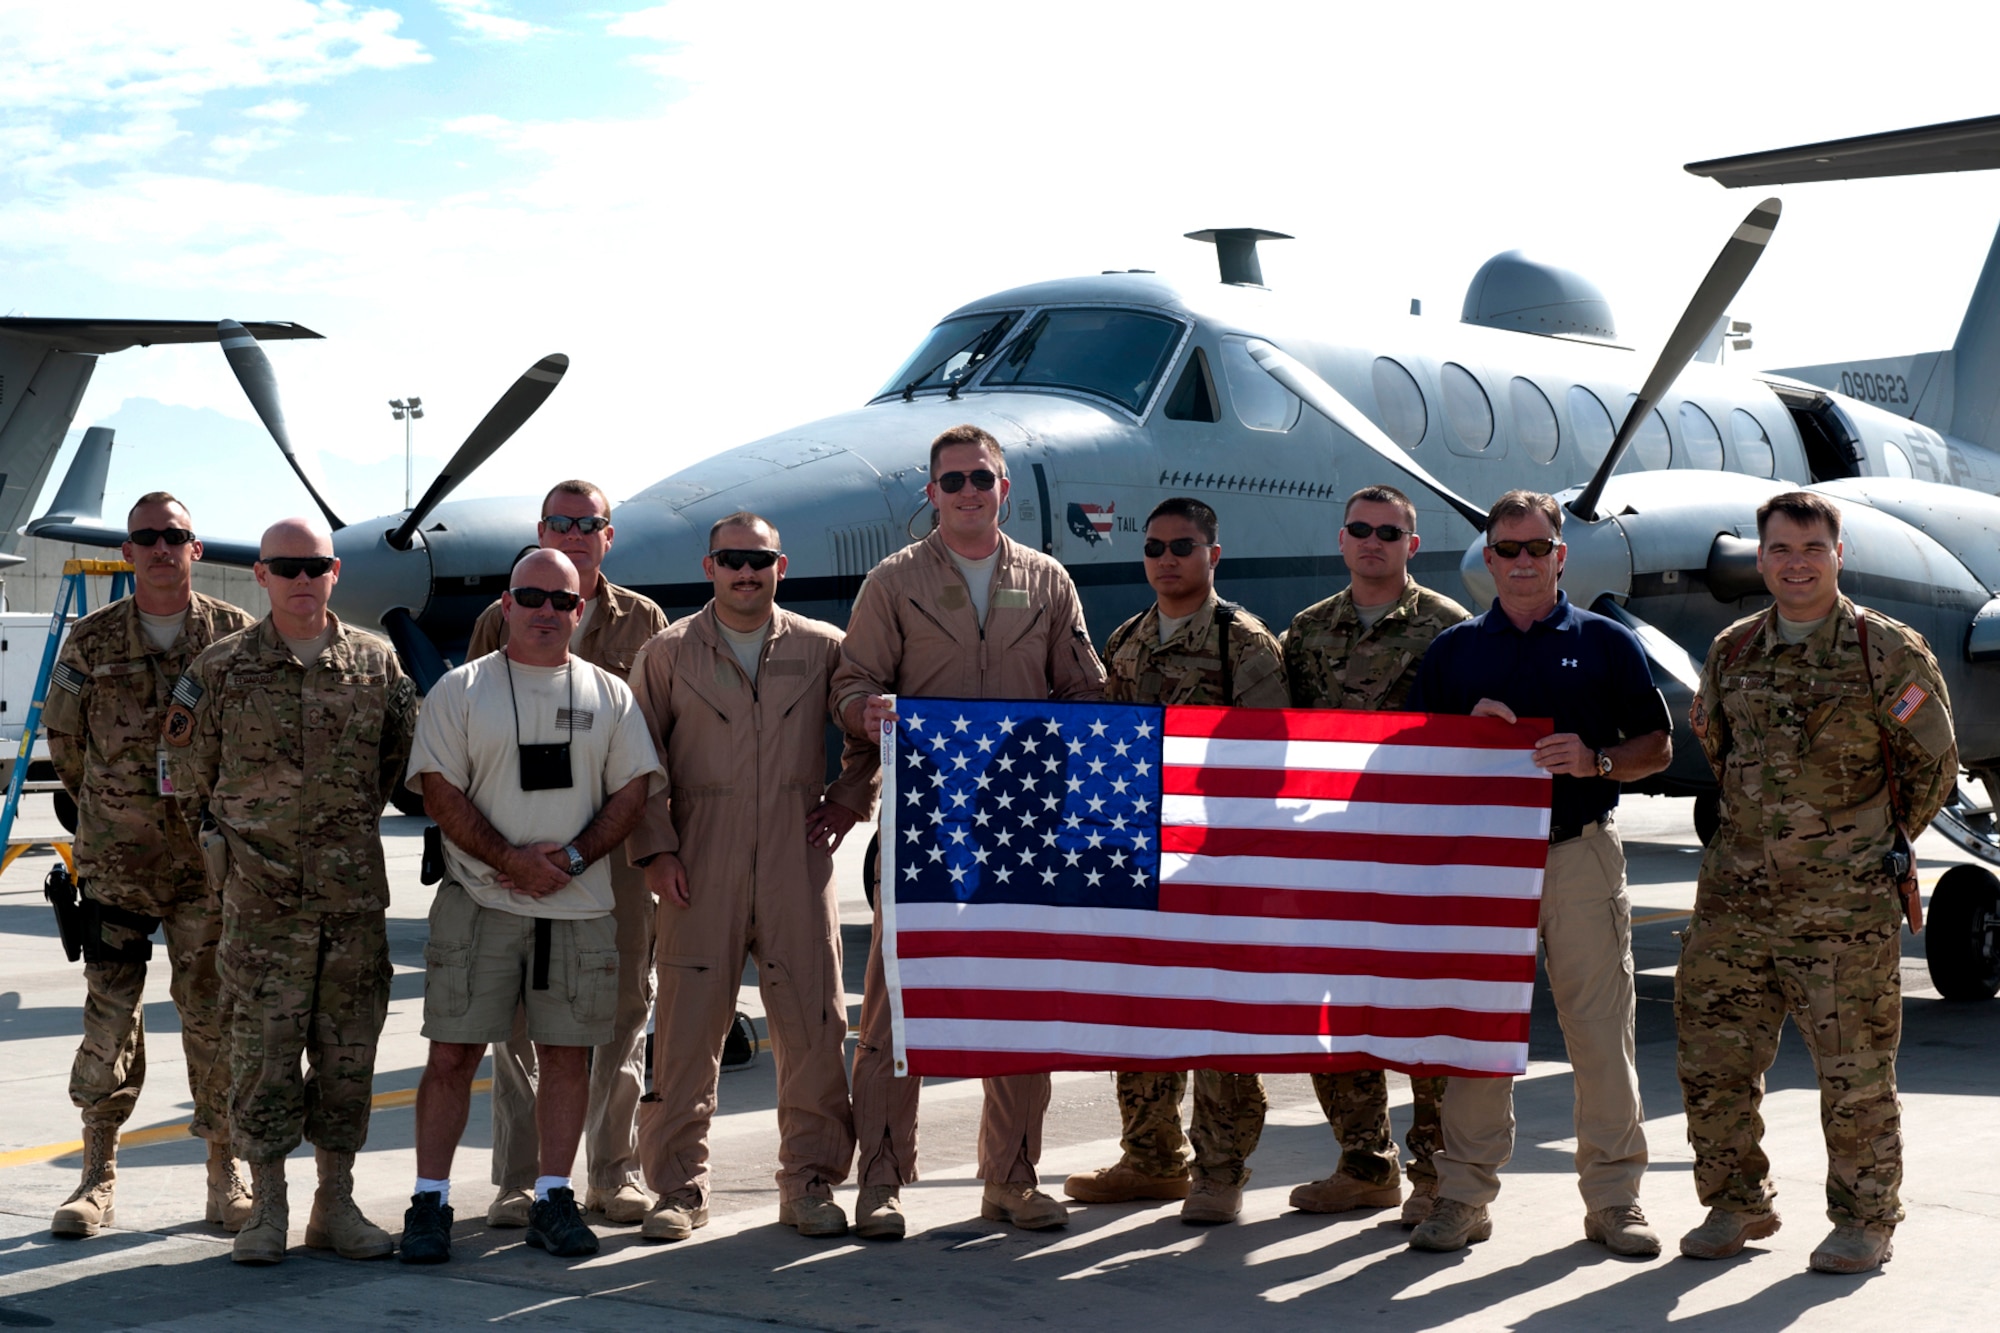 MC-12 Liberty crew members and leadership from the 4th Expeditionary Reconnaissance Squadron pause for a photo in front of one of their aircraft at Bagram Airfield, Afghanistan, September 11, 2012. The conclusion of this mission marks a milestone, as it signifies the 4 ERS officially exceeding over 100,000 flying hours using the MC-12s since the unit was stood up in Dec. 2009. 100,000 flying hours roughly equates to 11 and a-half years of flying for one the aircraft. 4 ERS leadership can say they accomplished this feat in under three years using its fleet of MC-12s. The flag in the photo was flown on the first 4 ERS combat mission at Bagram. (U.S. Air Force photo/1st Lt. Marlene Solano)